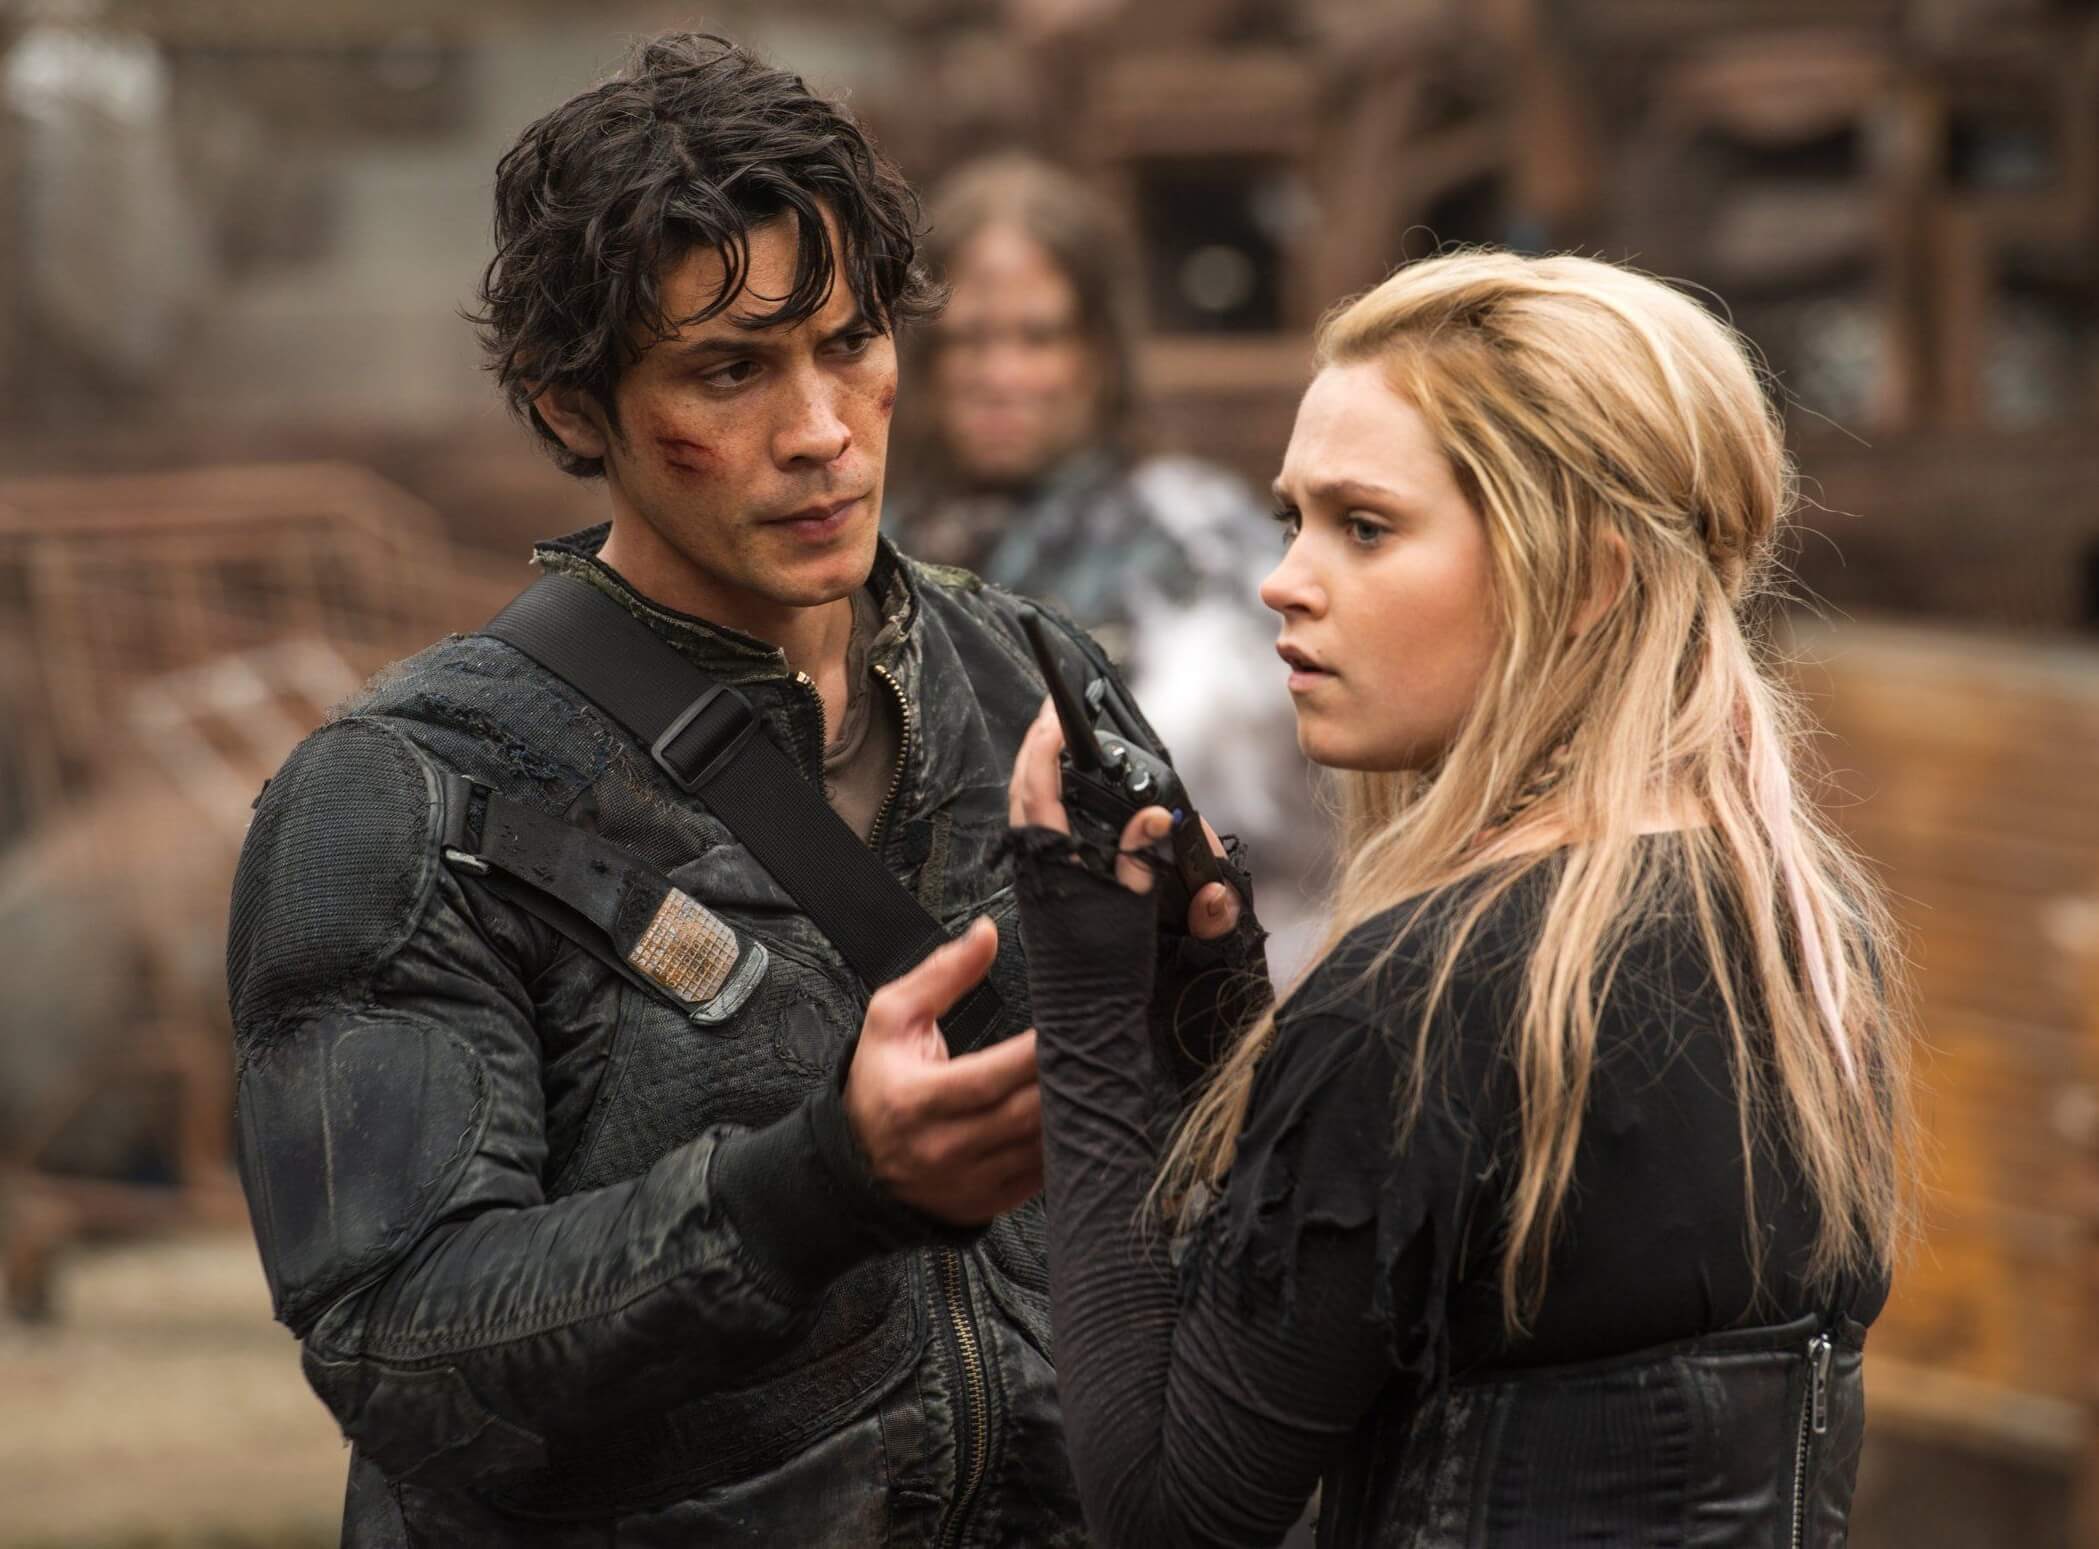 The 100 stars Eliza Taylor and Bob Morley to star in sci-fi thriller I'll Be Watching